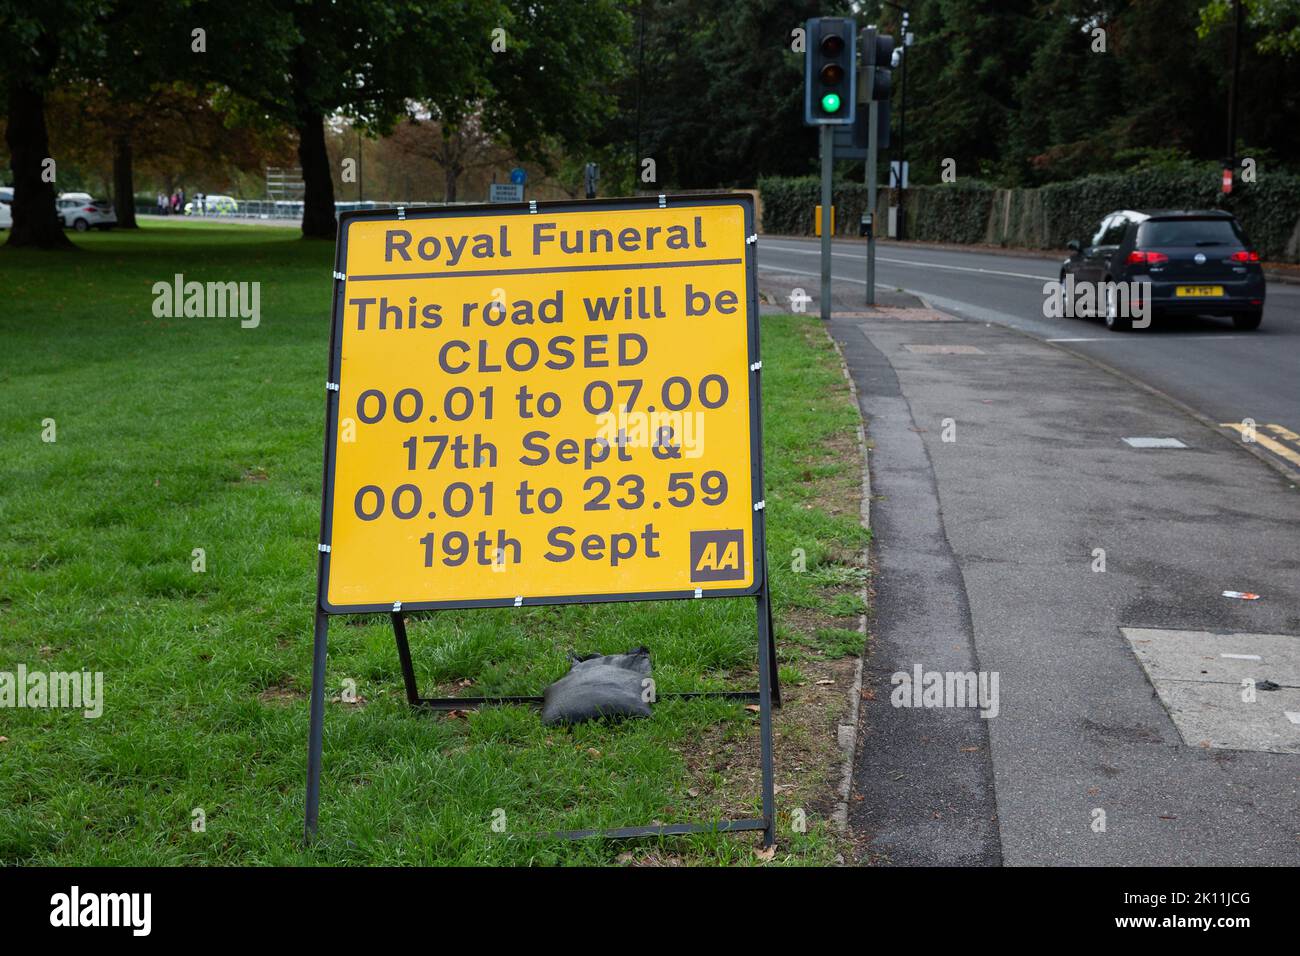 Windsor, UK. 14th September, 2022. A sign indicating a road closure for the funeral of Queen Elizabeth II is pictured. Queen Elizabeth II, the UK's longest-serving monarch, died at Balmoral aged 96 on 8th September after a reign lasting 70 years and will be buried in the King George VI memorial chapel in Windsor following a state funeral in Westminster Abbey on 19th September. Credit: Mark Kerrison/Alamy Live News Stock Photo